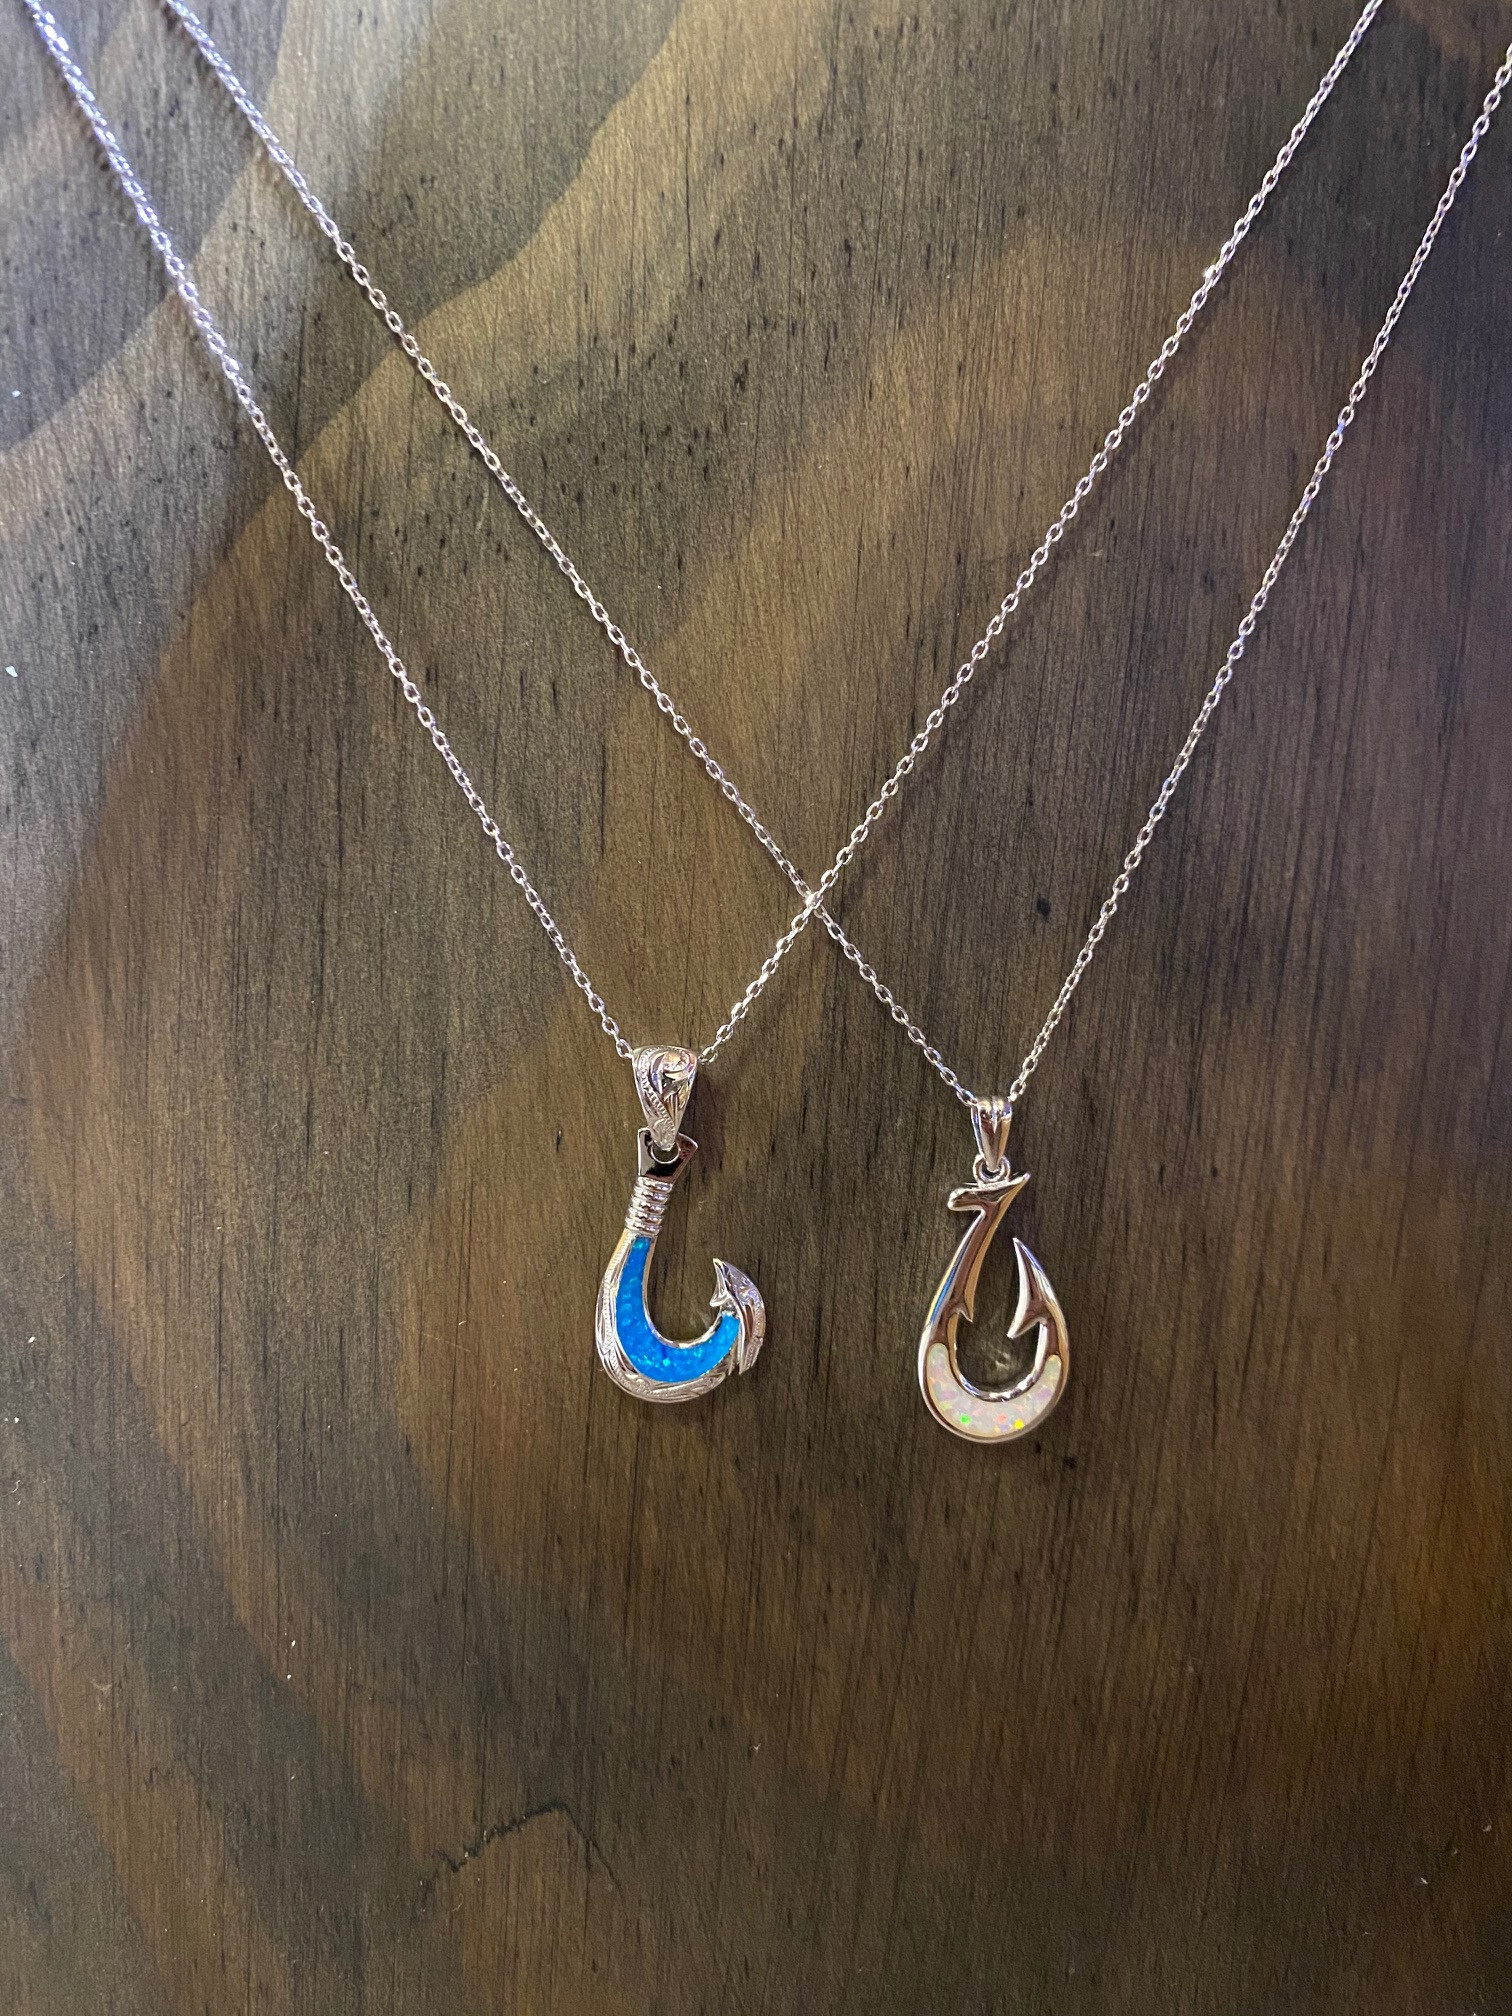 https://cdn10.bigcommerce.com/s-90gulf/products/2446/images/4993/sterling_silver_fish_hook_opal_necklace___56379.1607879006.2280.2280.jpg?c=2